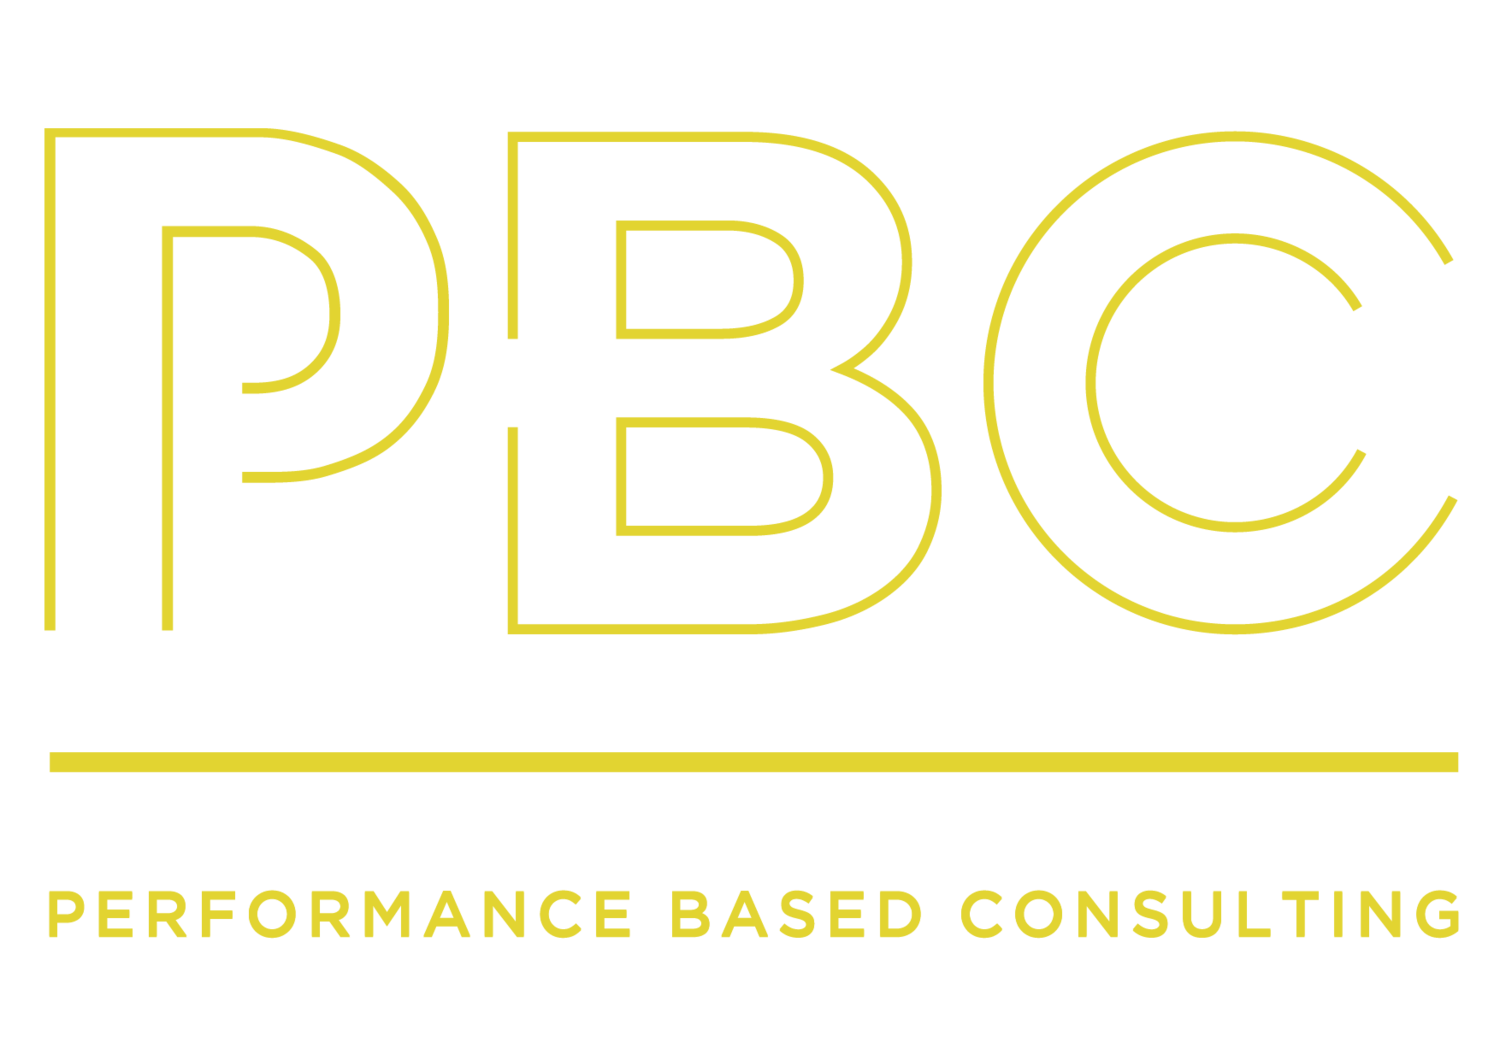 Performance Based Consulting